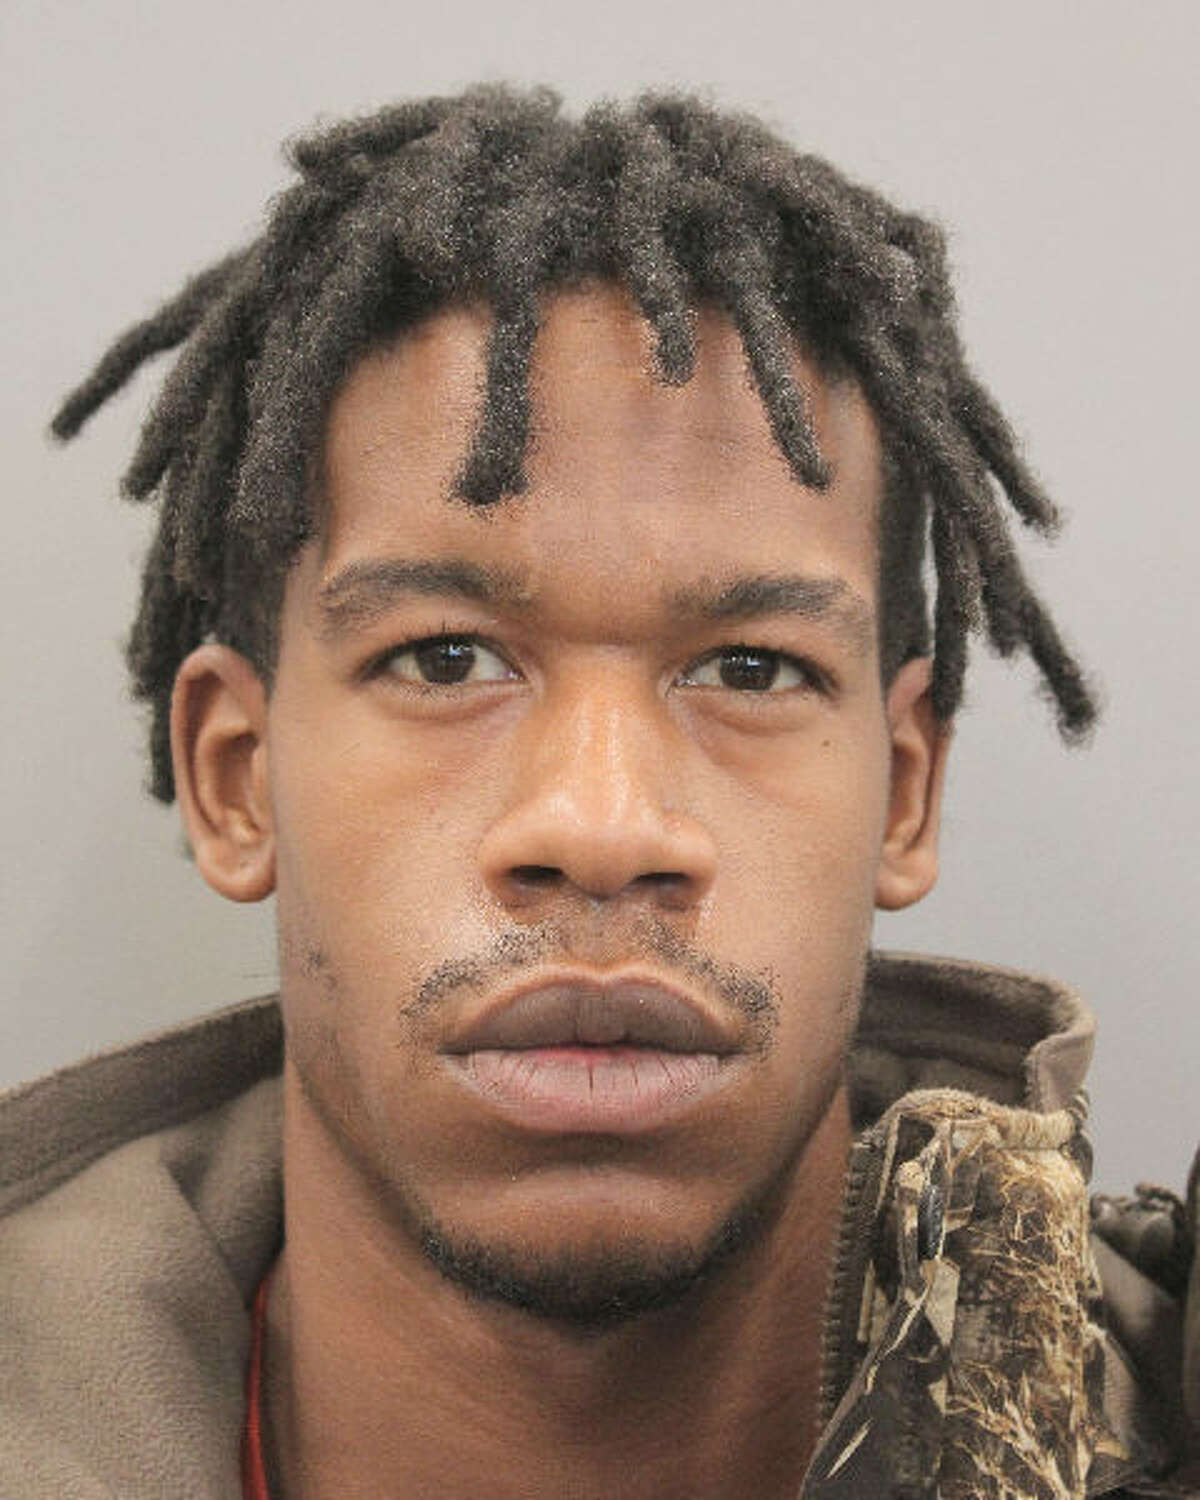 Anthony Elijah Edwards, 25, is accused of shooting and killing Dequan M. Landry, 23 around 9:20 a.m. Saturday, Oct. 29 in the parking lot of a gas station at 9101 Clinton Drive